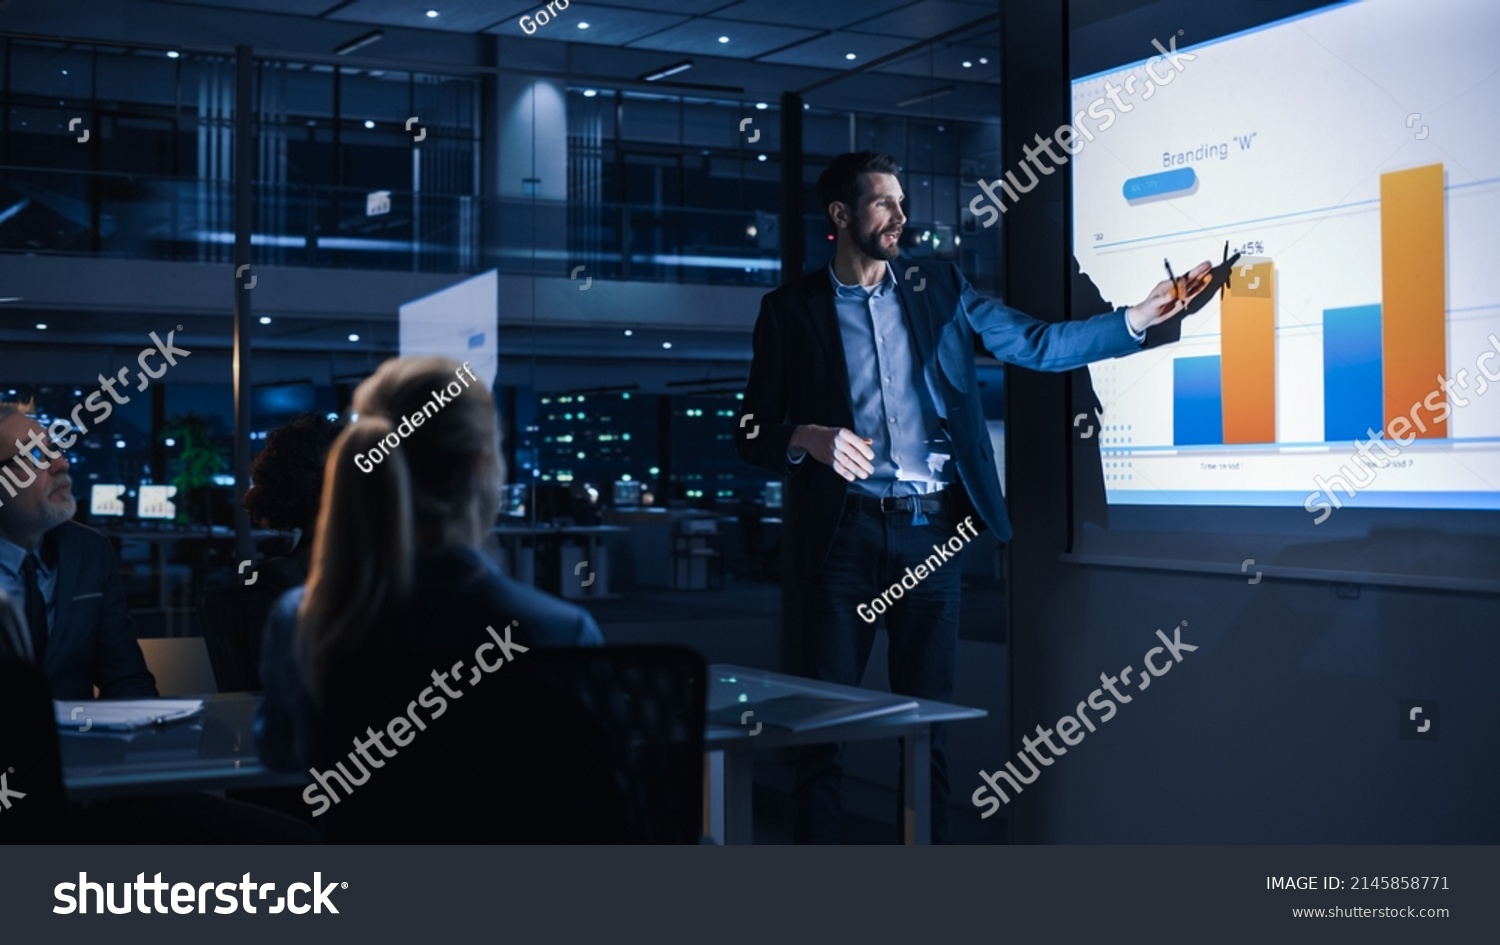 Conference Business Meeting Presentation: CEO Businessman Shows Data to Group of Investors, Businessspeople. Projector Screen Shows Graphs, Product Sales, Revenue Growth Strategy, e-Commerce Analysis #2145858771